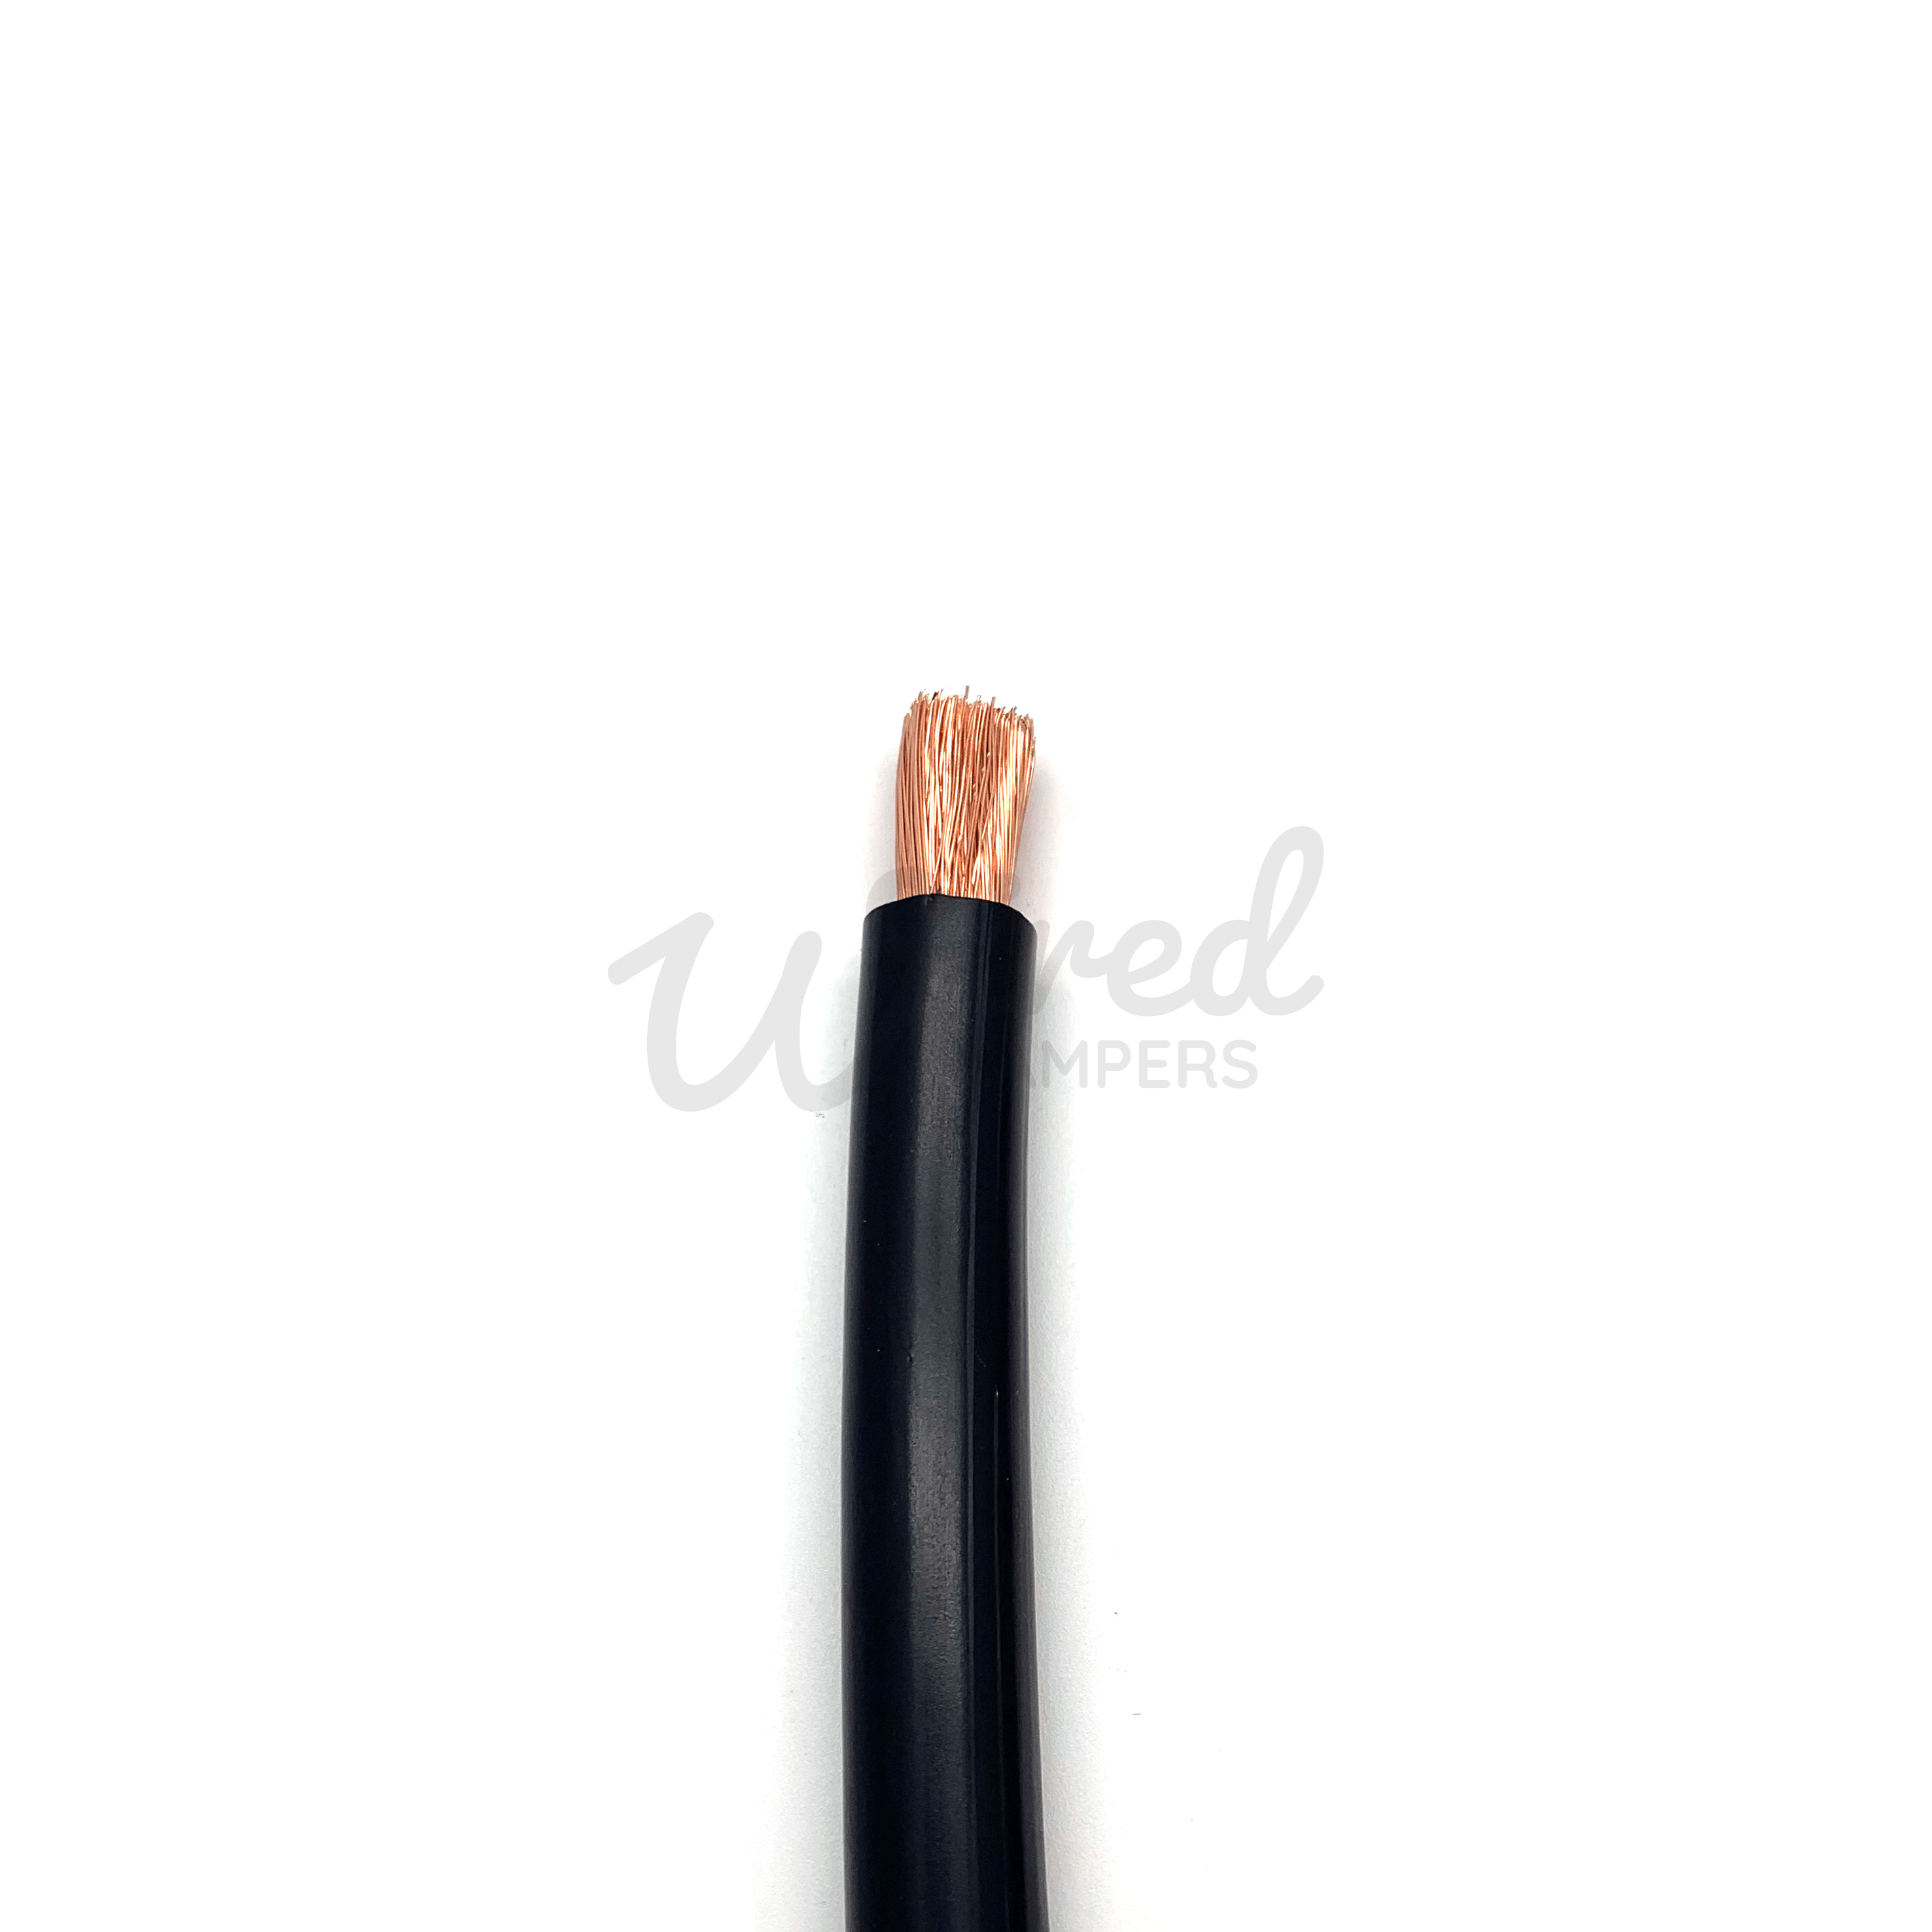 Wired Campers Limited 10M - 50mm² 345A Hi-Flex Battery/Welding/Inverter Flexible Cable - Black Negative